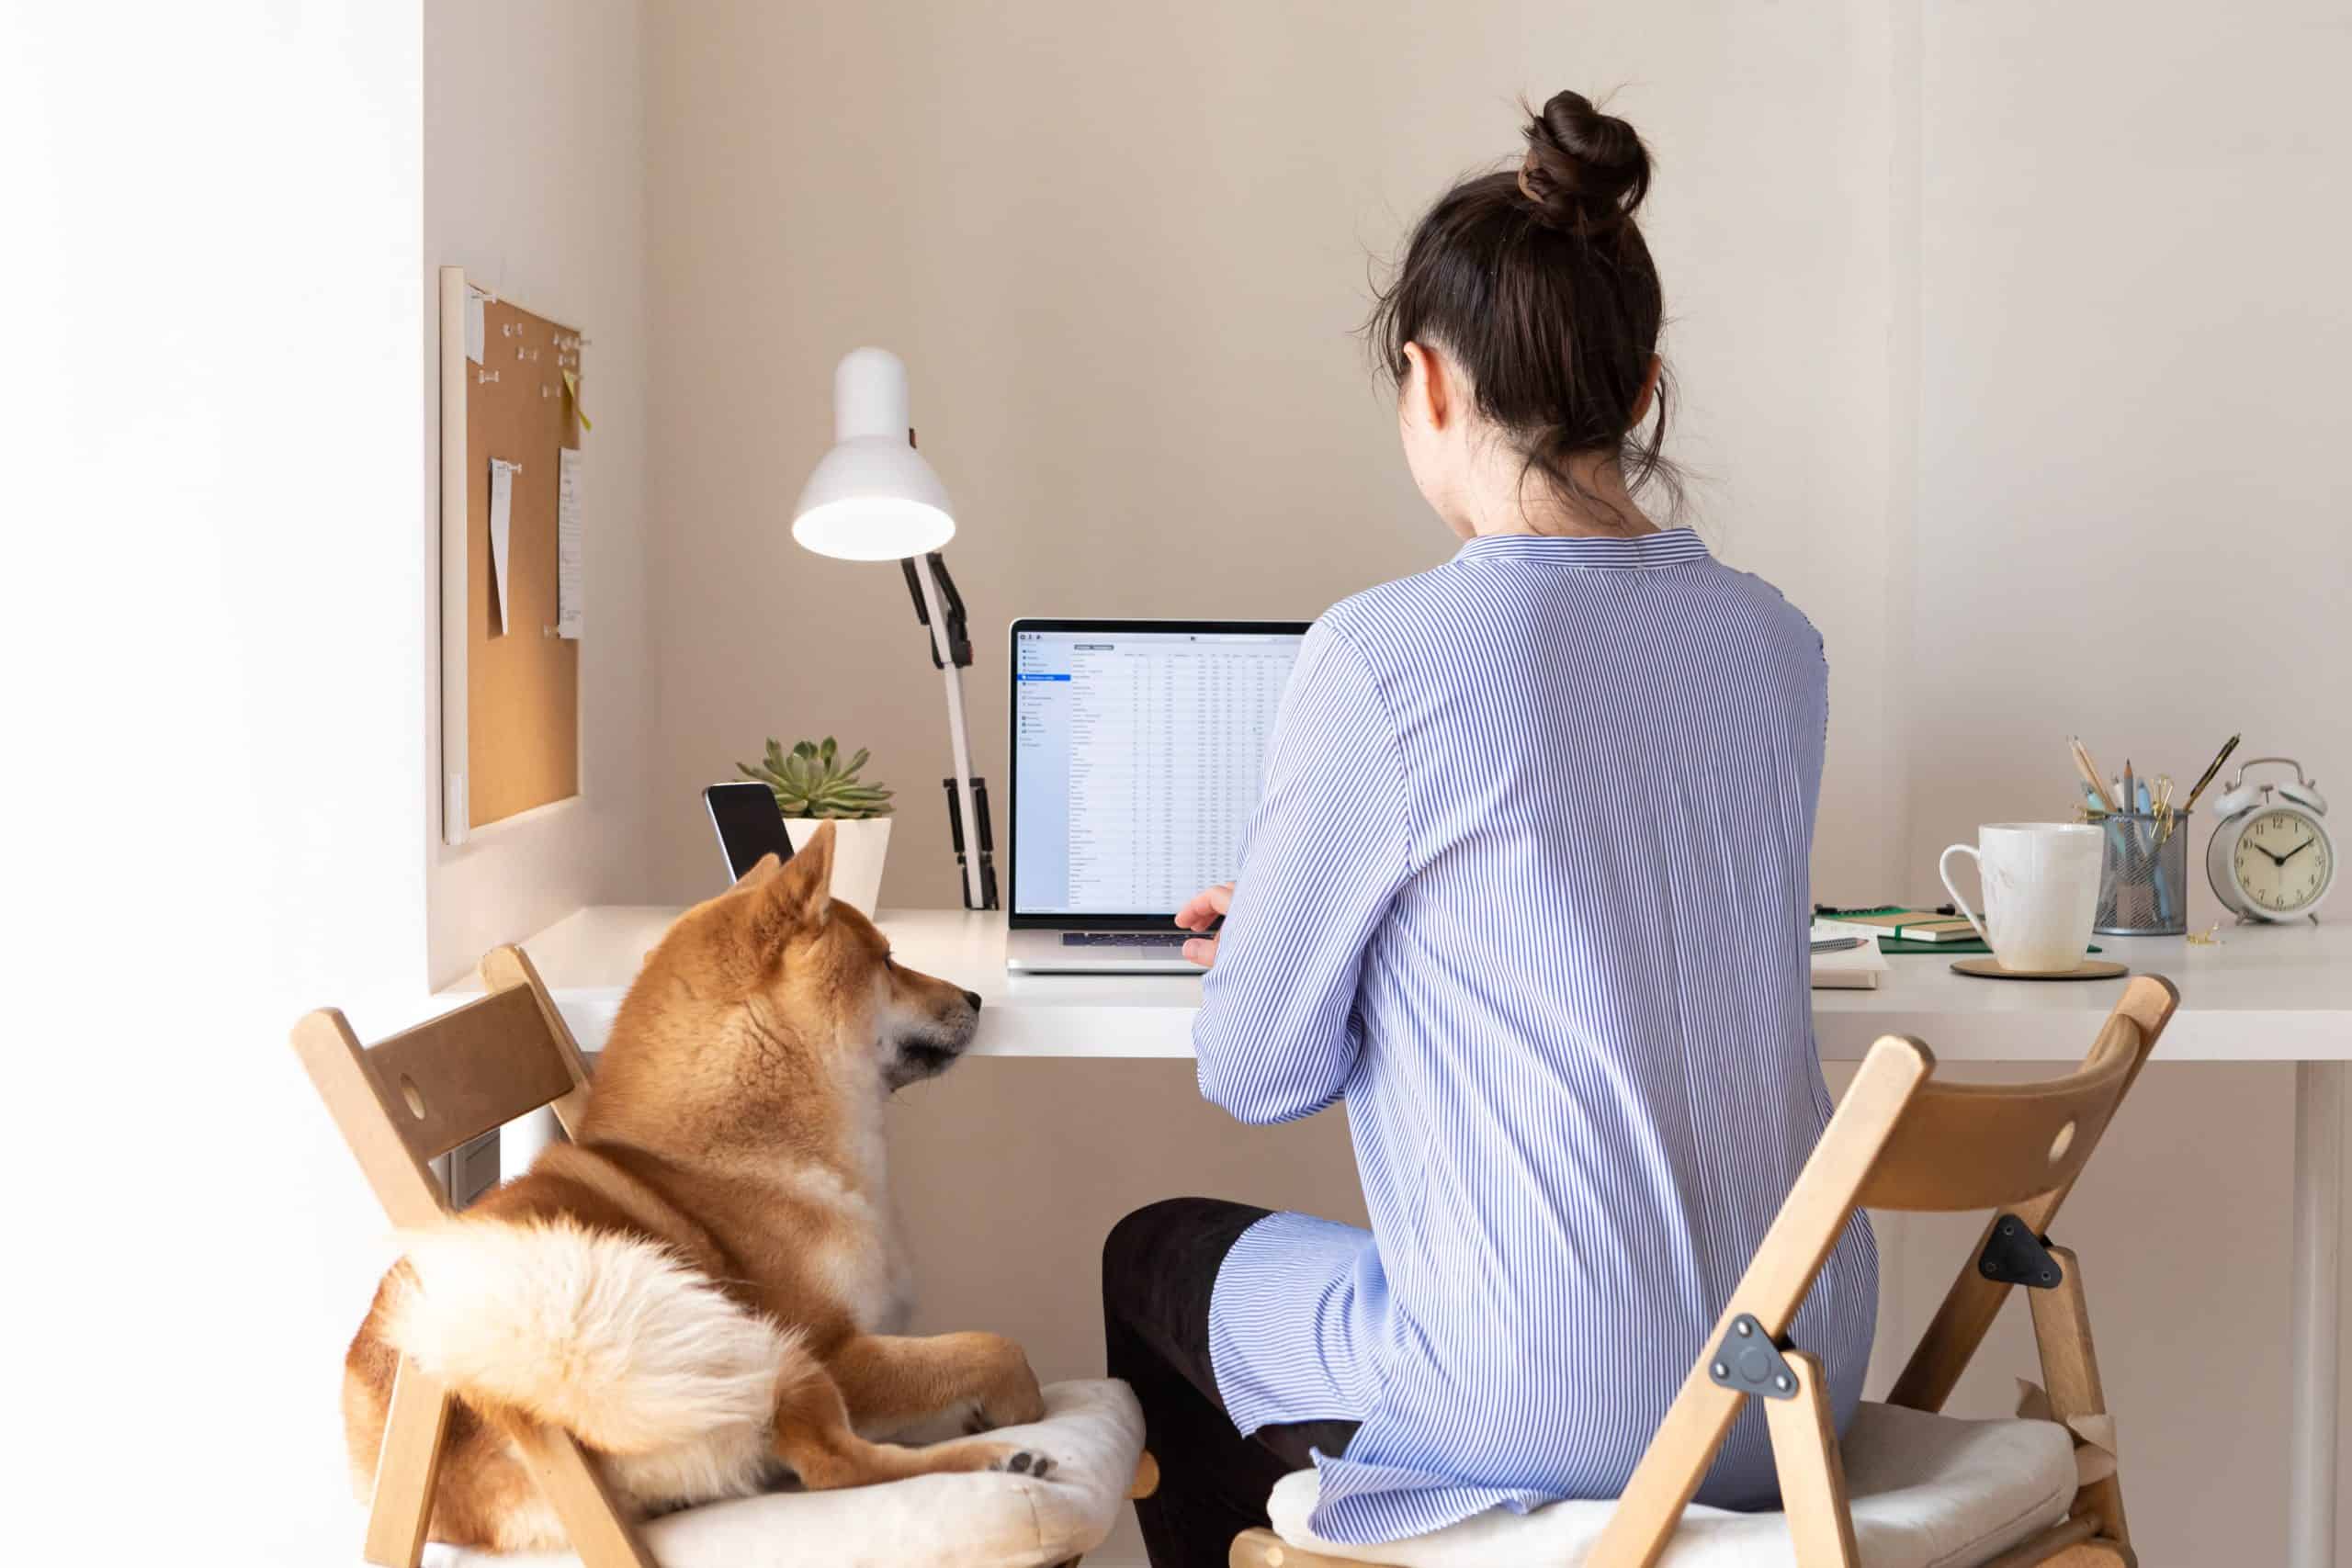 Shiba Inu watches woman work on her computer.